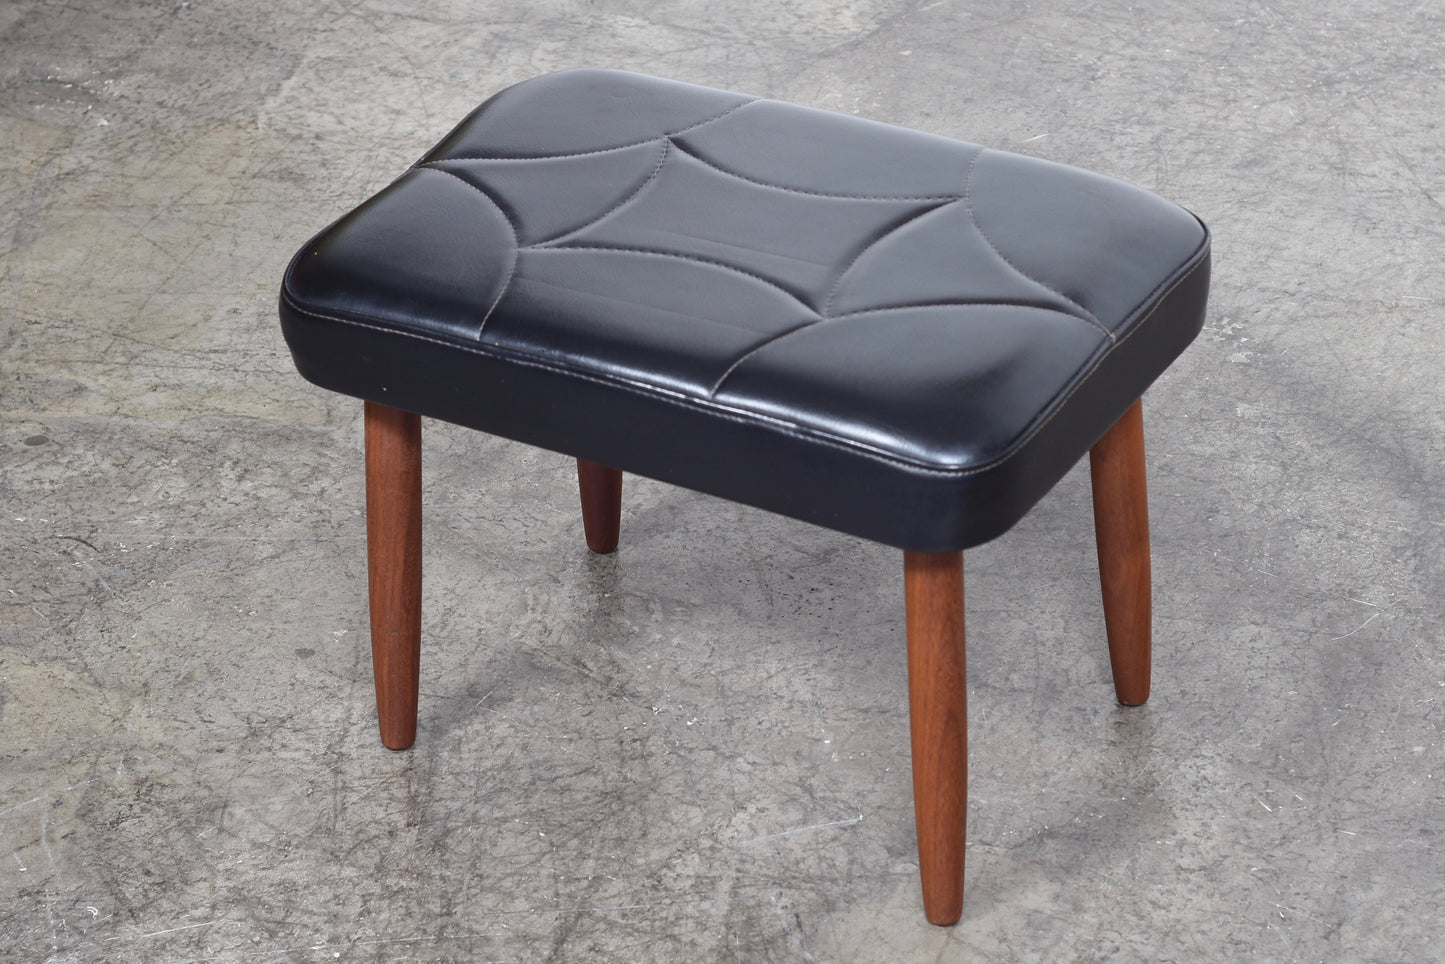 Two available: Skai foot stool with teak legs